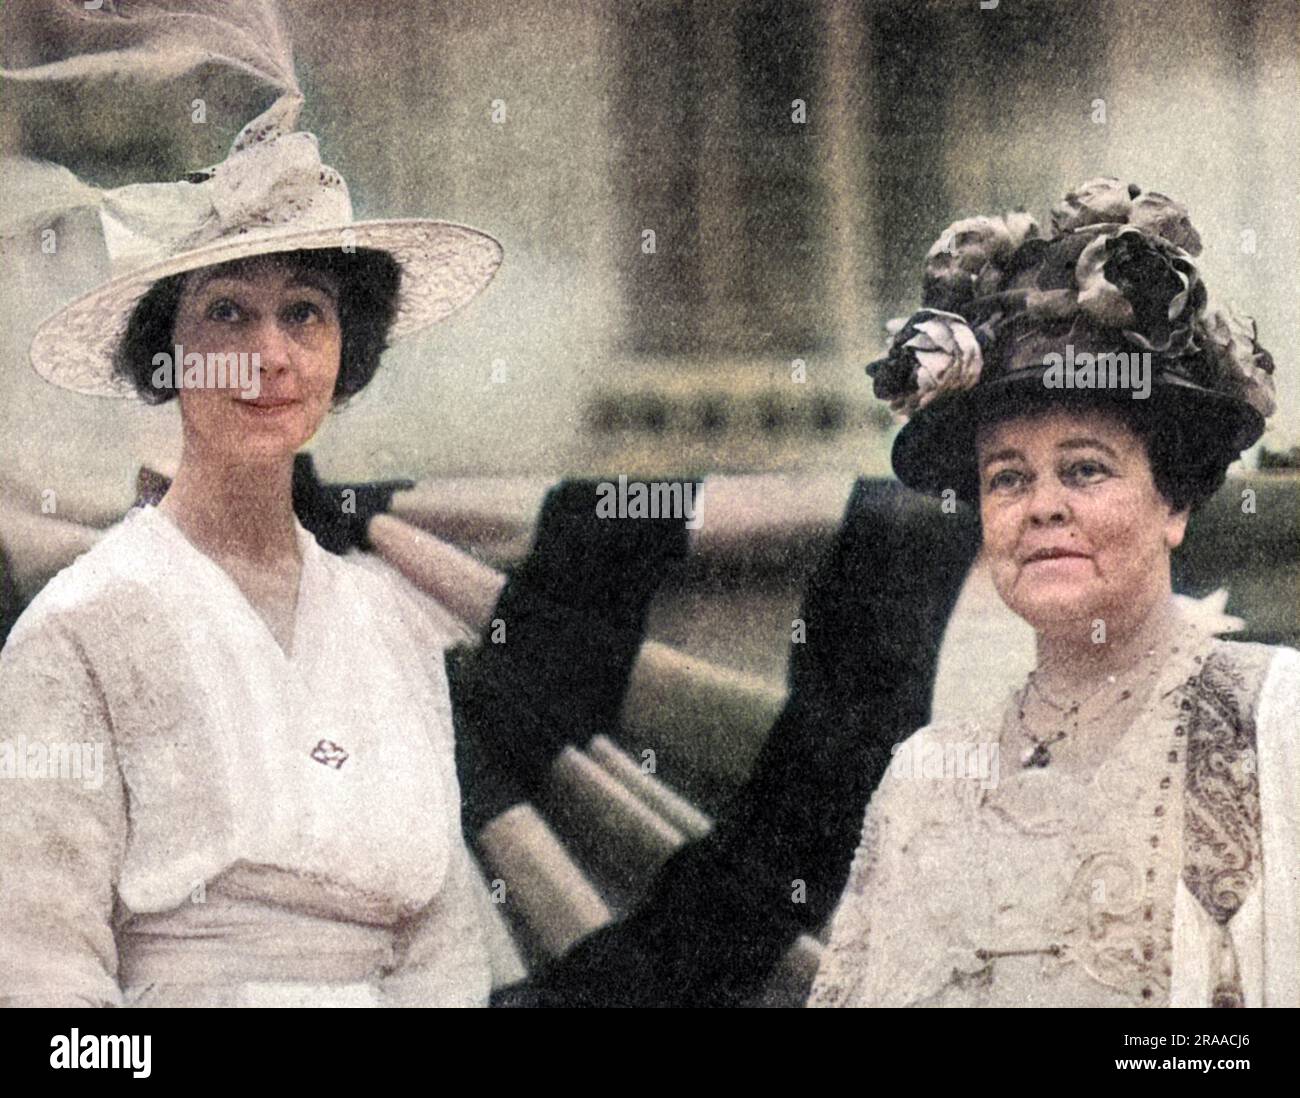 Consuelo, Duchess of Marlborough, formerly Consuelo Vanderbilt (1877 - 1964), American heiress and first wife of Charles Spencer-Churchill, 9th Duke of Marlborough pictured with Mrs O. H. P. Belmont, campaigner for women's suffrage in American, with whom the Duchess was staying at Marble House, Newport.     Date: 1914 Stock Photo